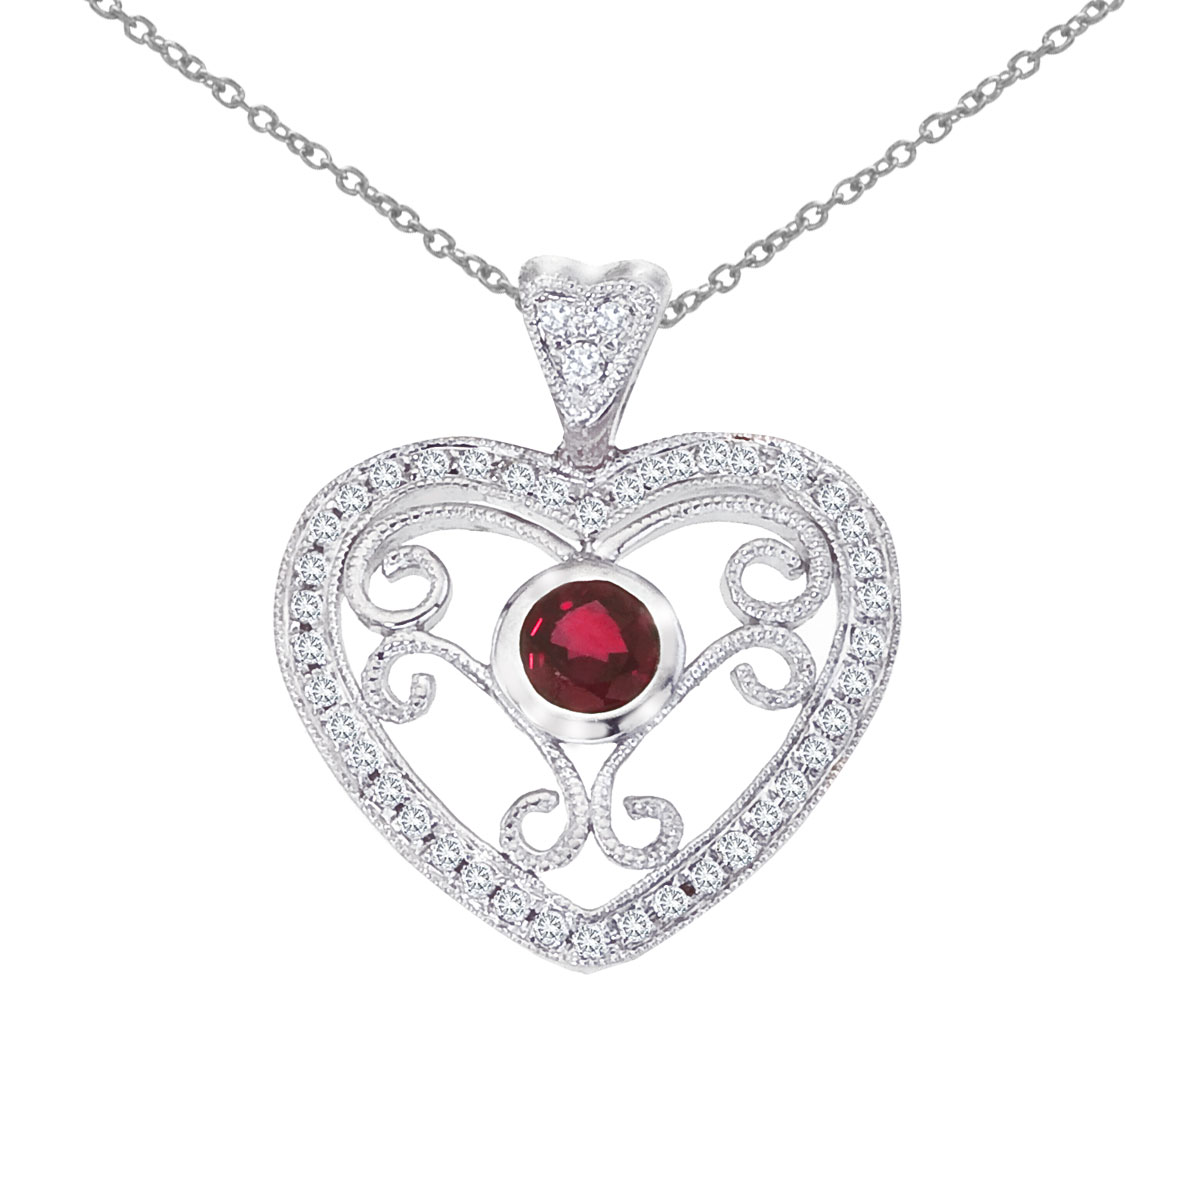 Symbolize everlasting precious love with this 14k white gold heart pendant containing a 3.5 mm ru...